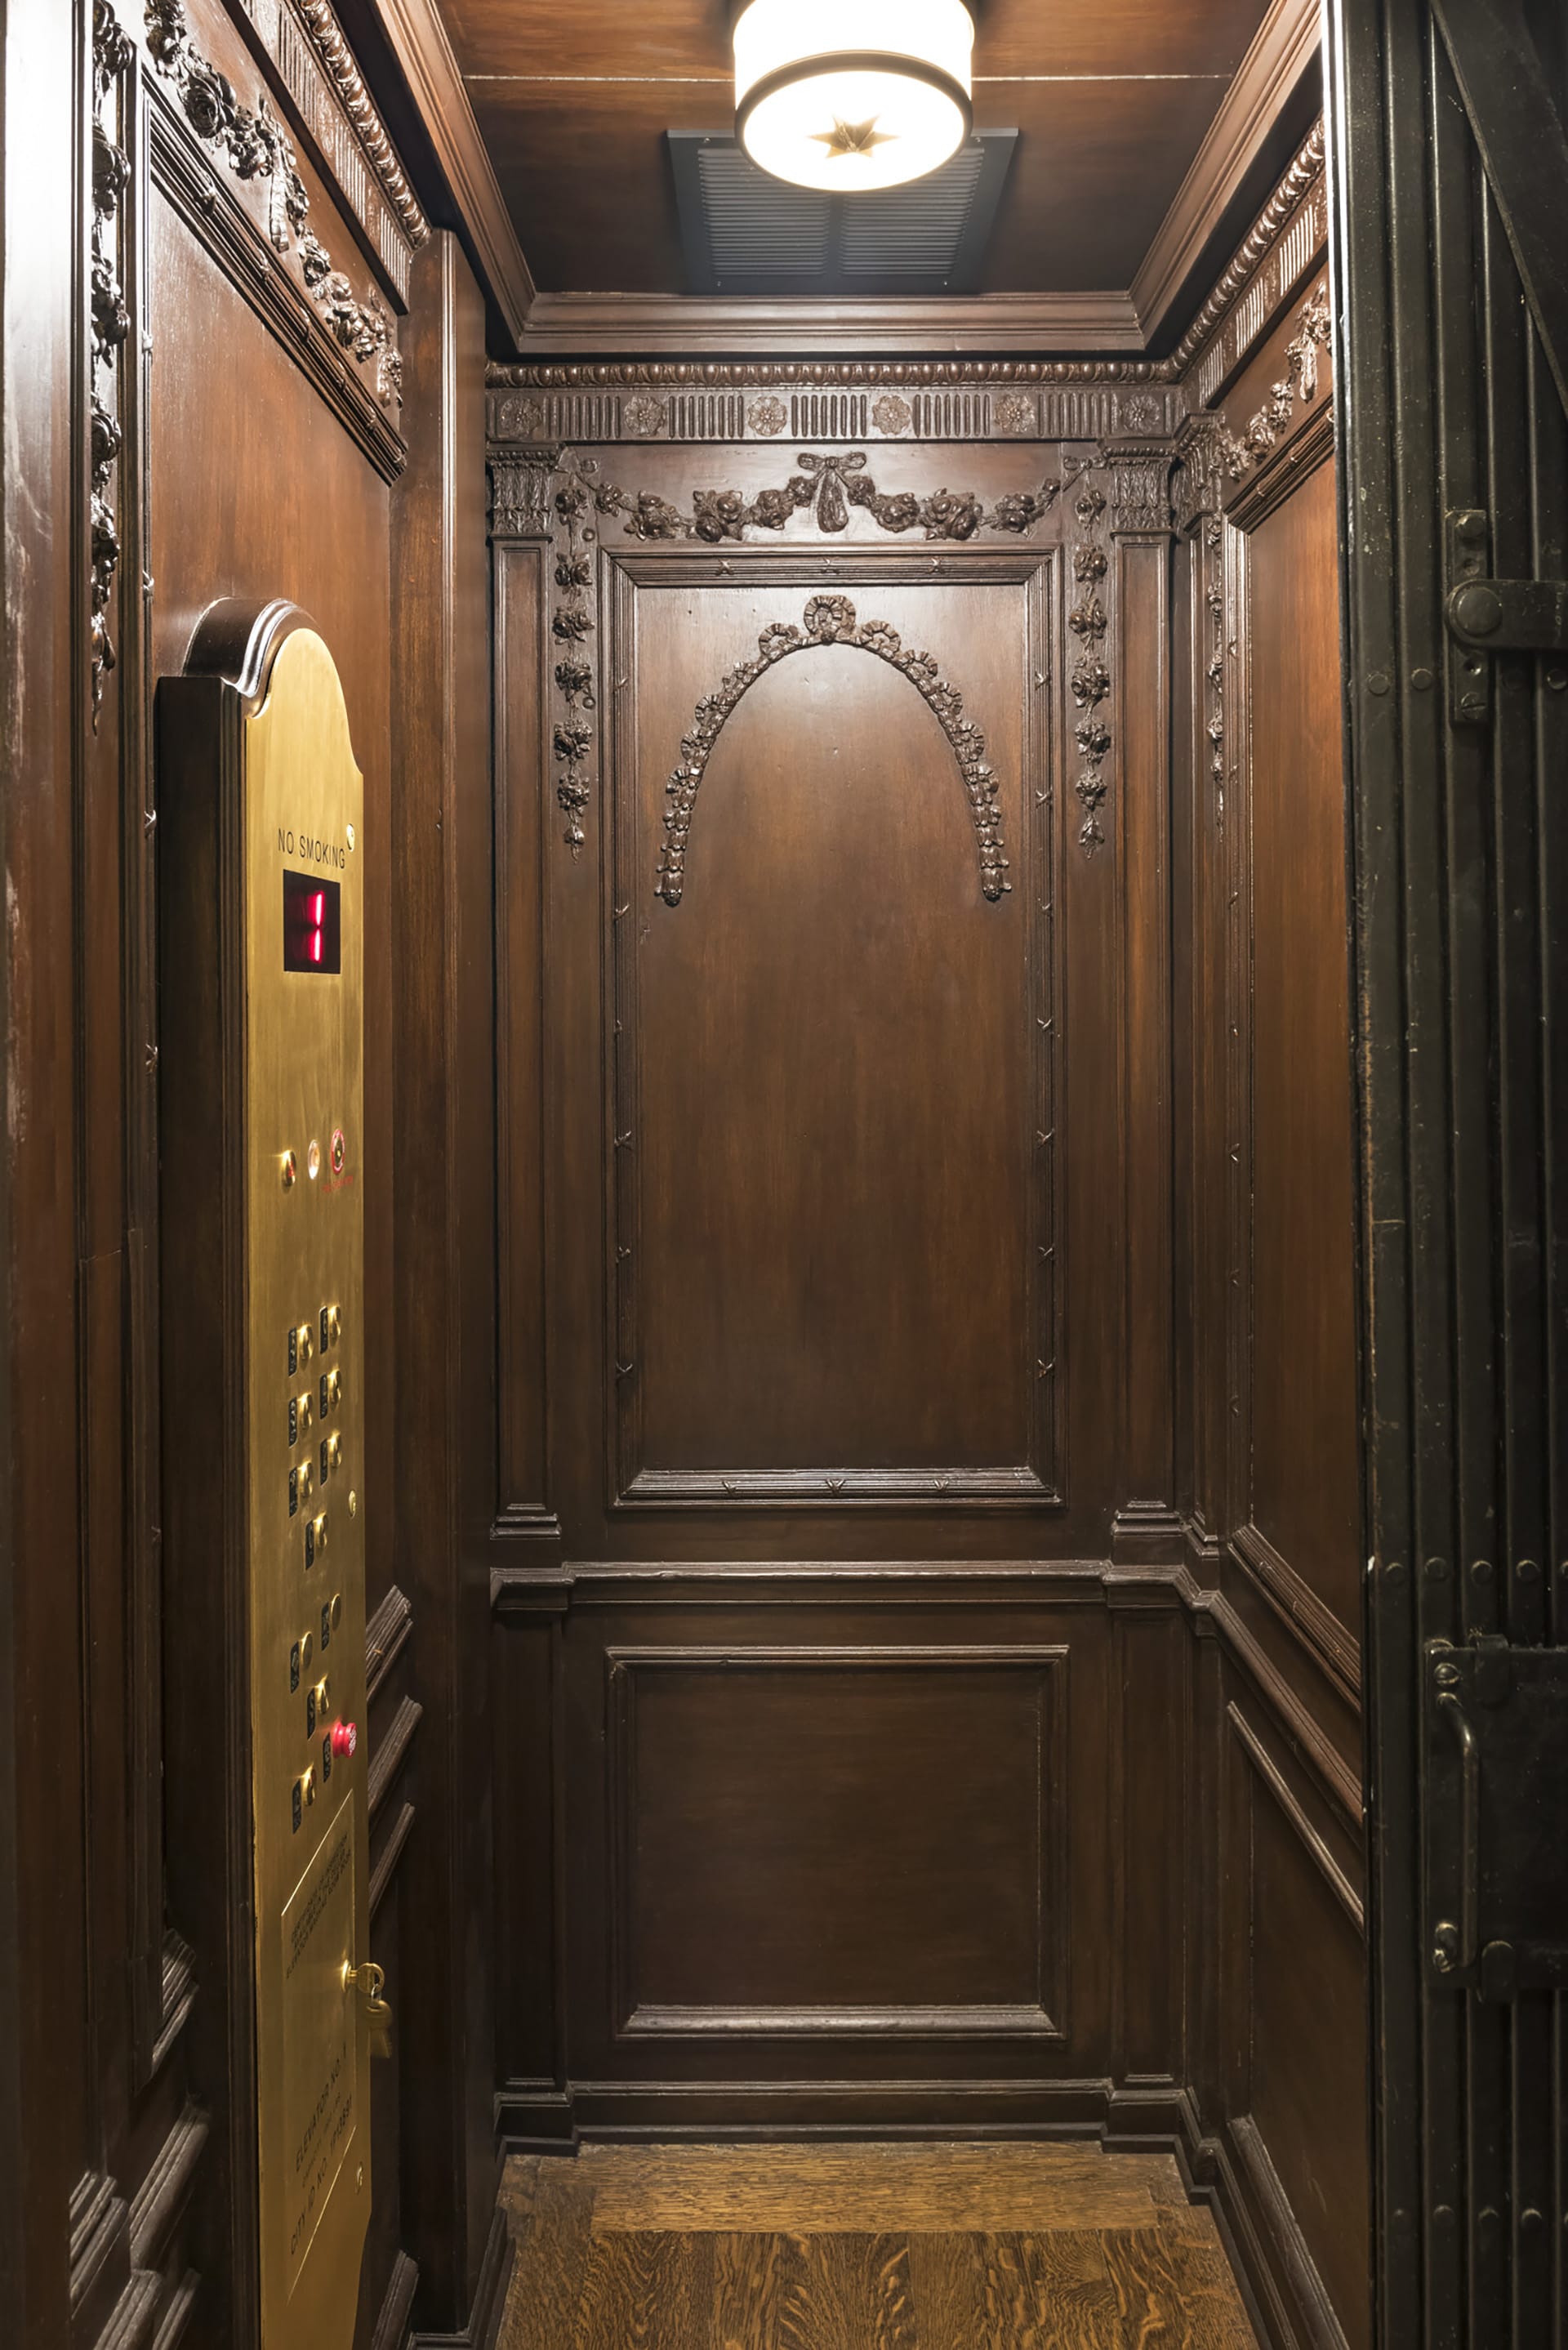 Restored elevator cab with carved wood walls and a gold control panel.